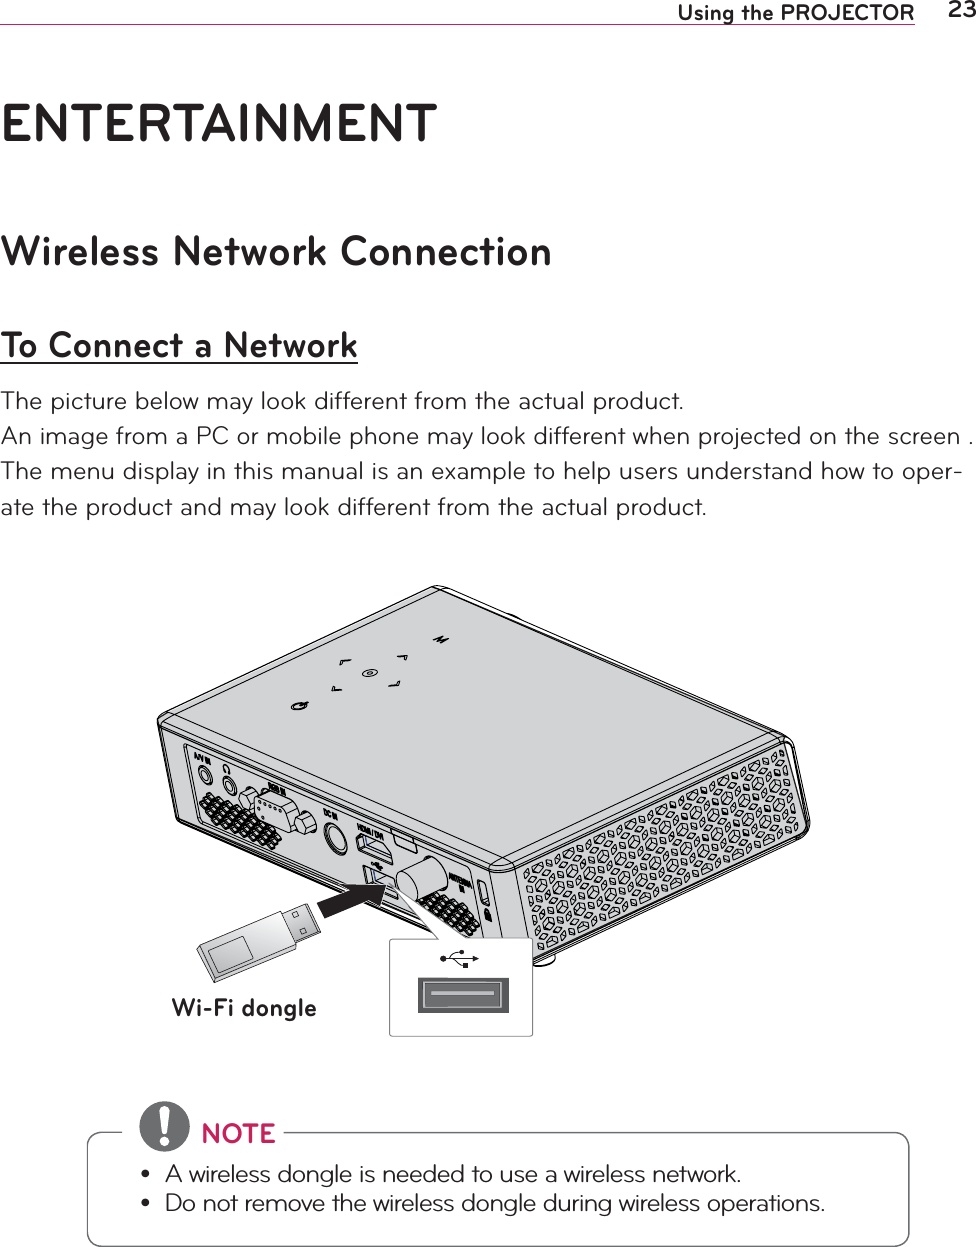 23Using the PROJECTORWireless Network ConnectionTo Connect a NetworkThe picture below may look different from the actual product.An image from a PC or mobile phone may look different when projected on the screen .The menu display in this manual is an example to help users understand how to oper-ate the product and may look different from the actual product.#NOTE yA wireless dongle is needed to use a wireless network. yDo not remove the wireless dongle during wireless operations.Wi-Fi dongleENTERTAINMENT